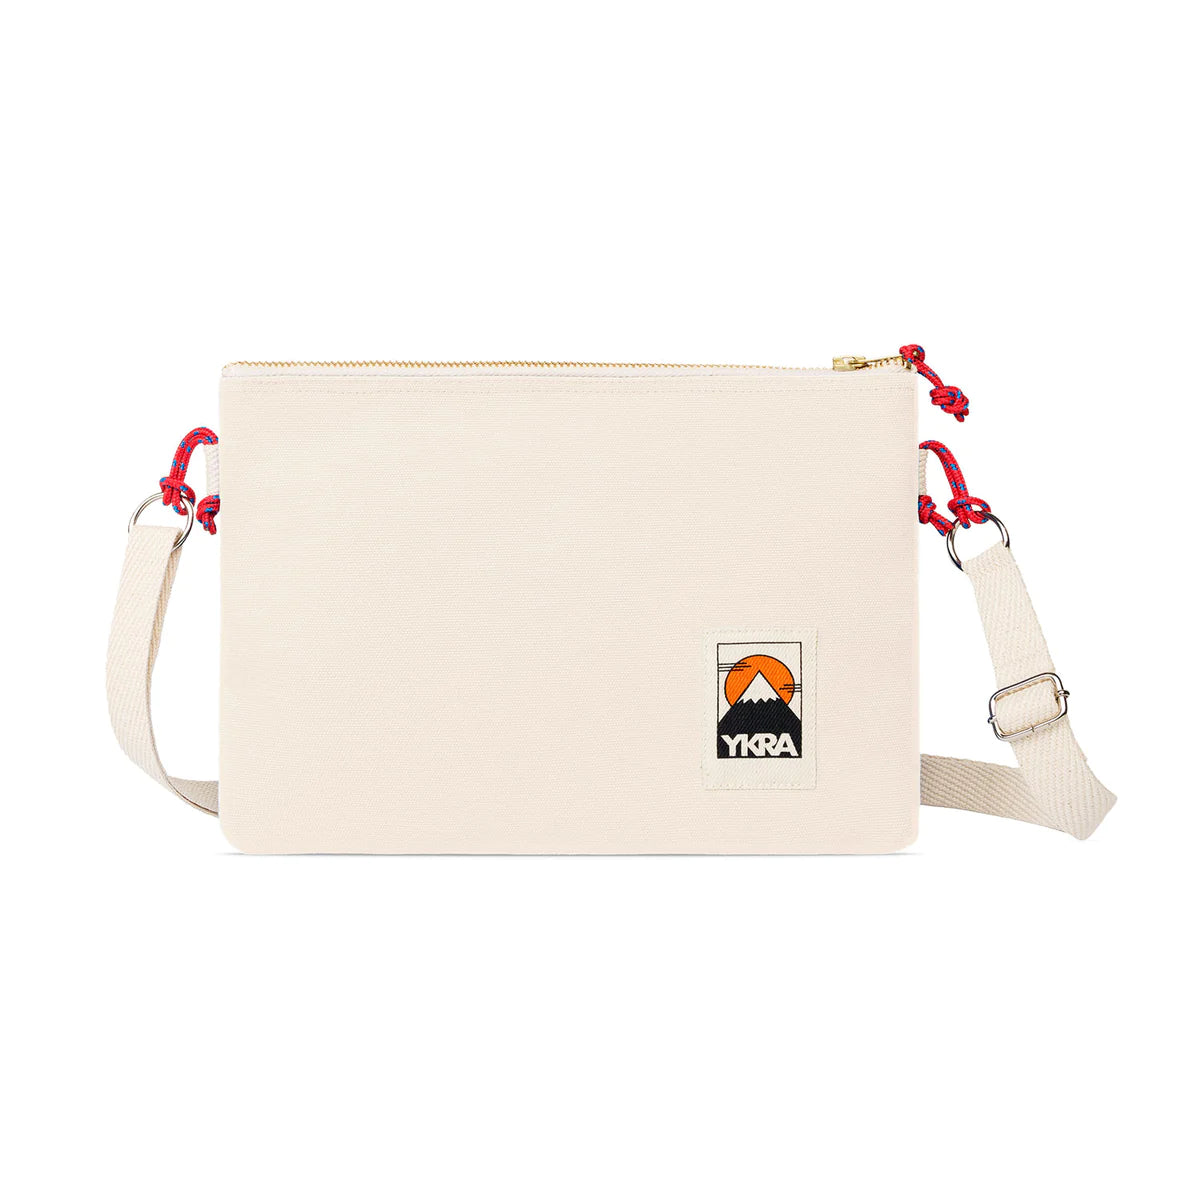 ykra side pouch - white